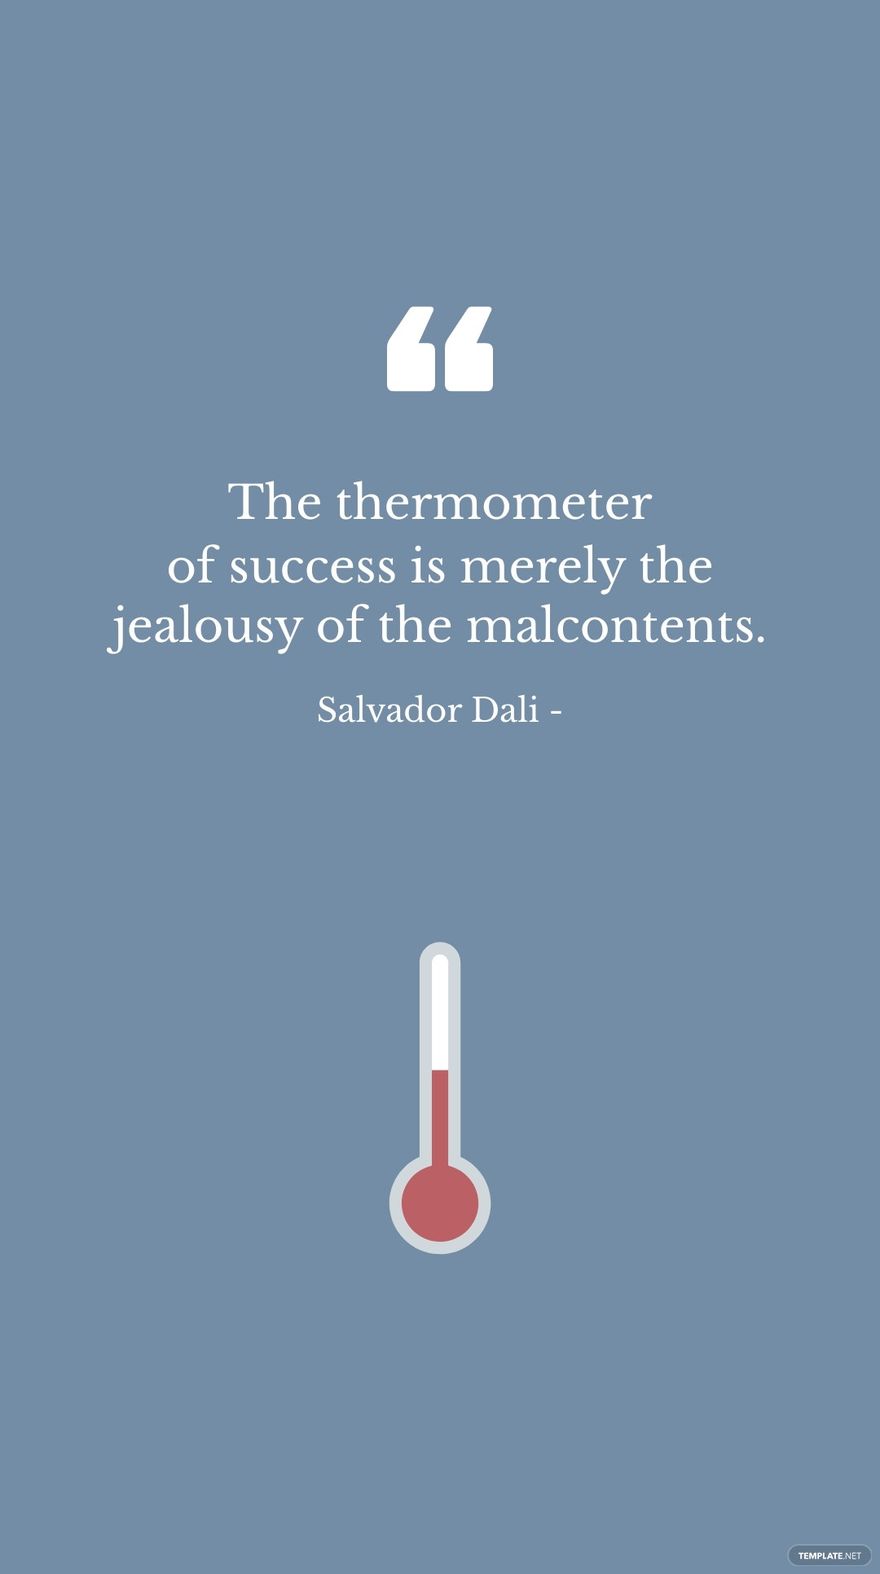 Free Salvador Dali - The thermometer of success is merely the jealousy of the malcontents.